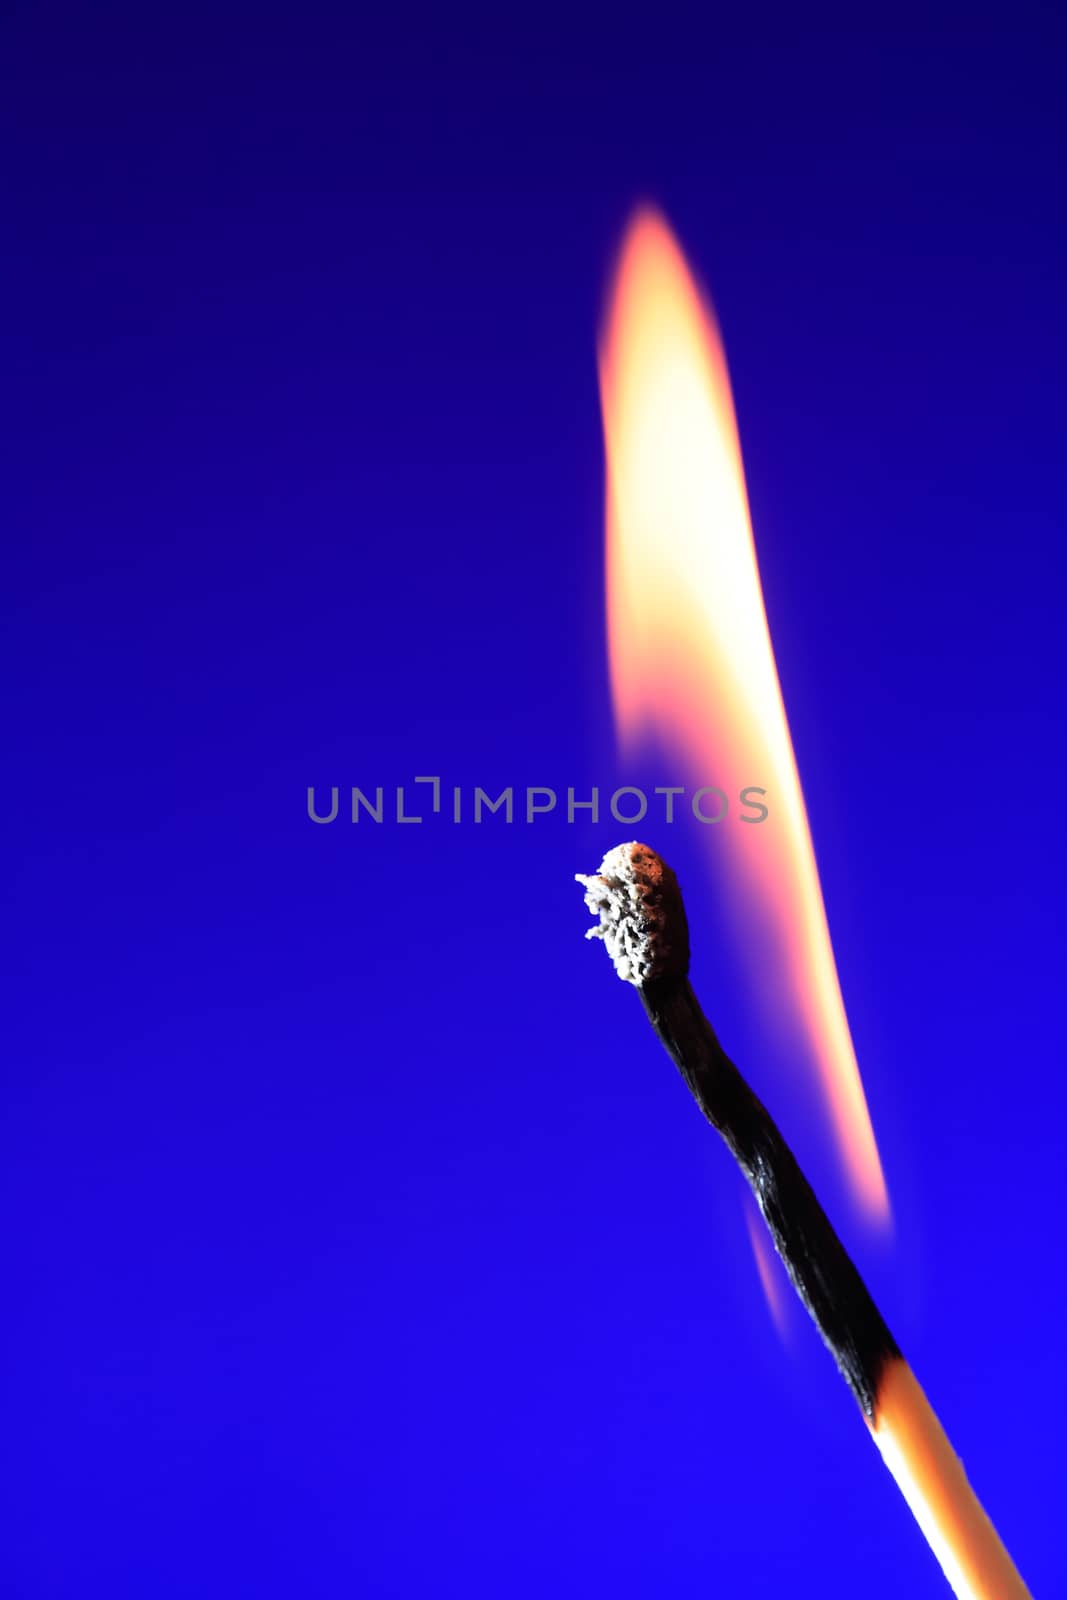 Lighting matchstick on blue background with free space for text